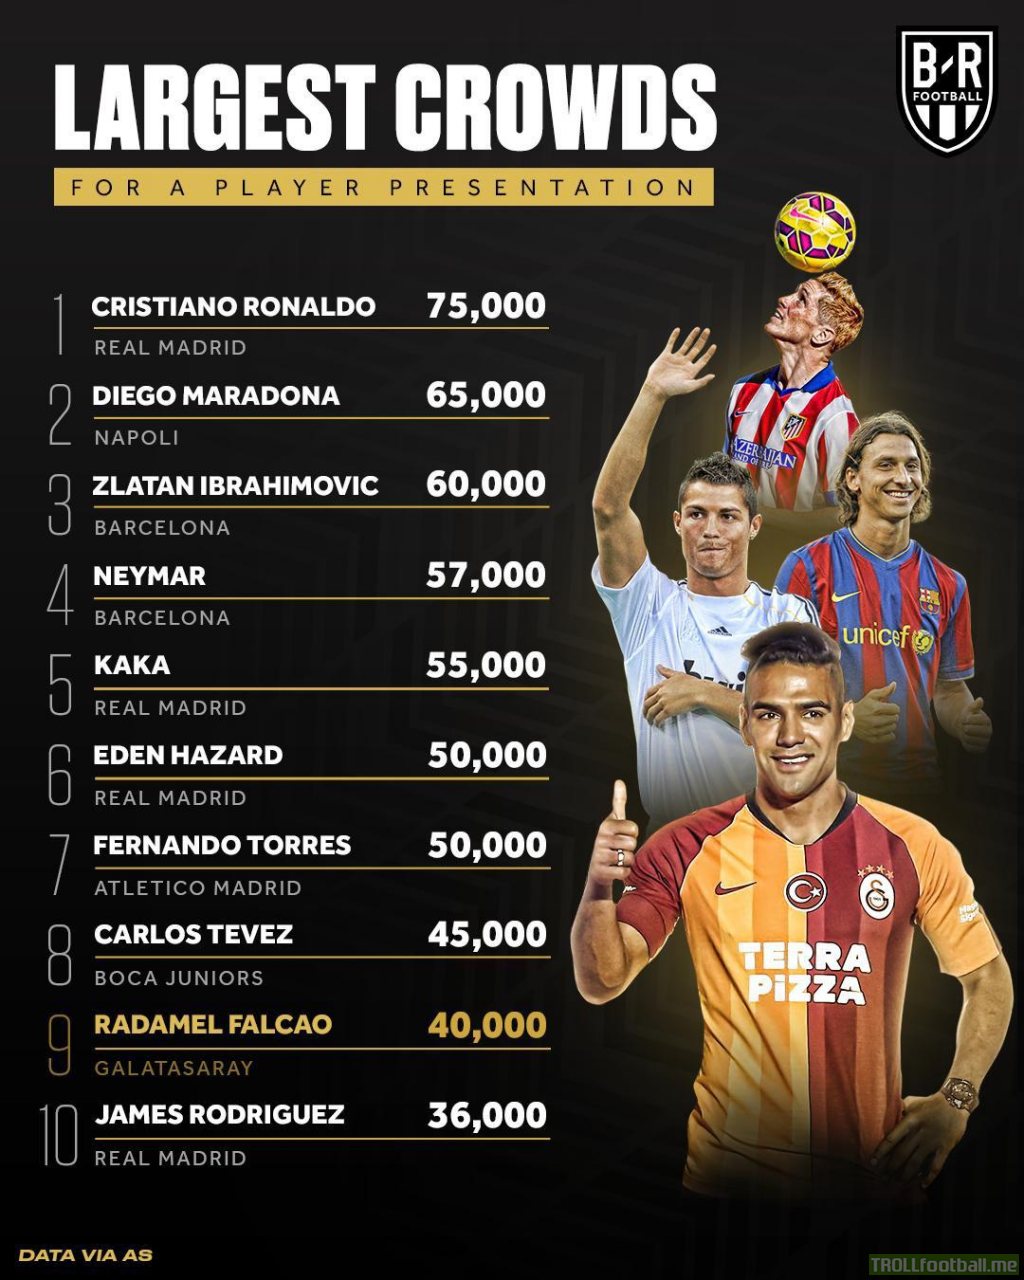 40,000 fans showing up at Falcao’s unveiling at Galatasaray puts it in the top 10 largest player unveilings